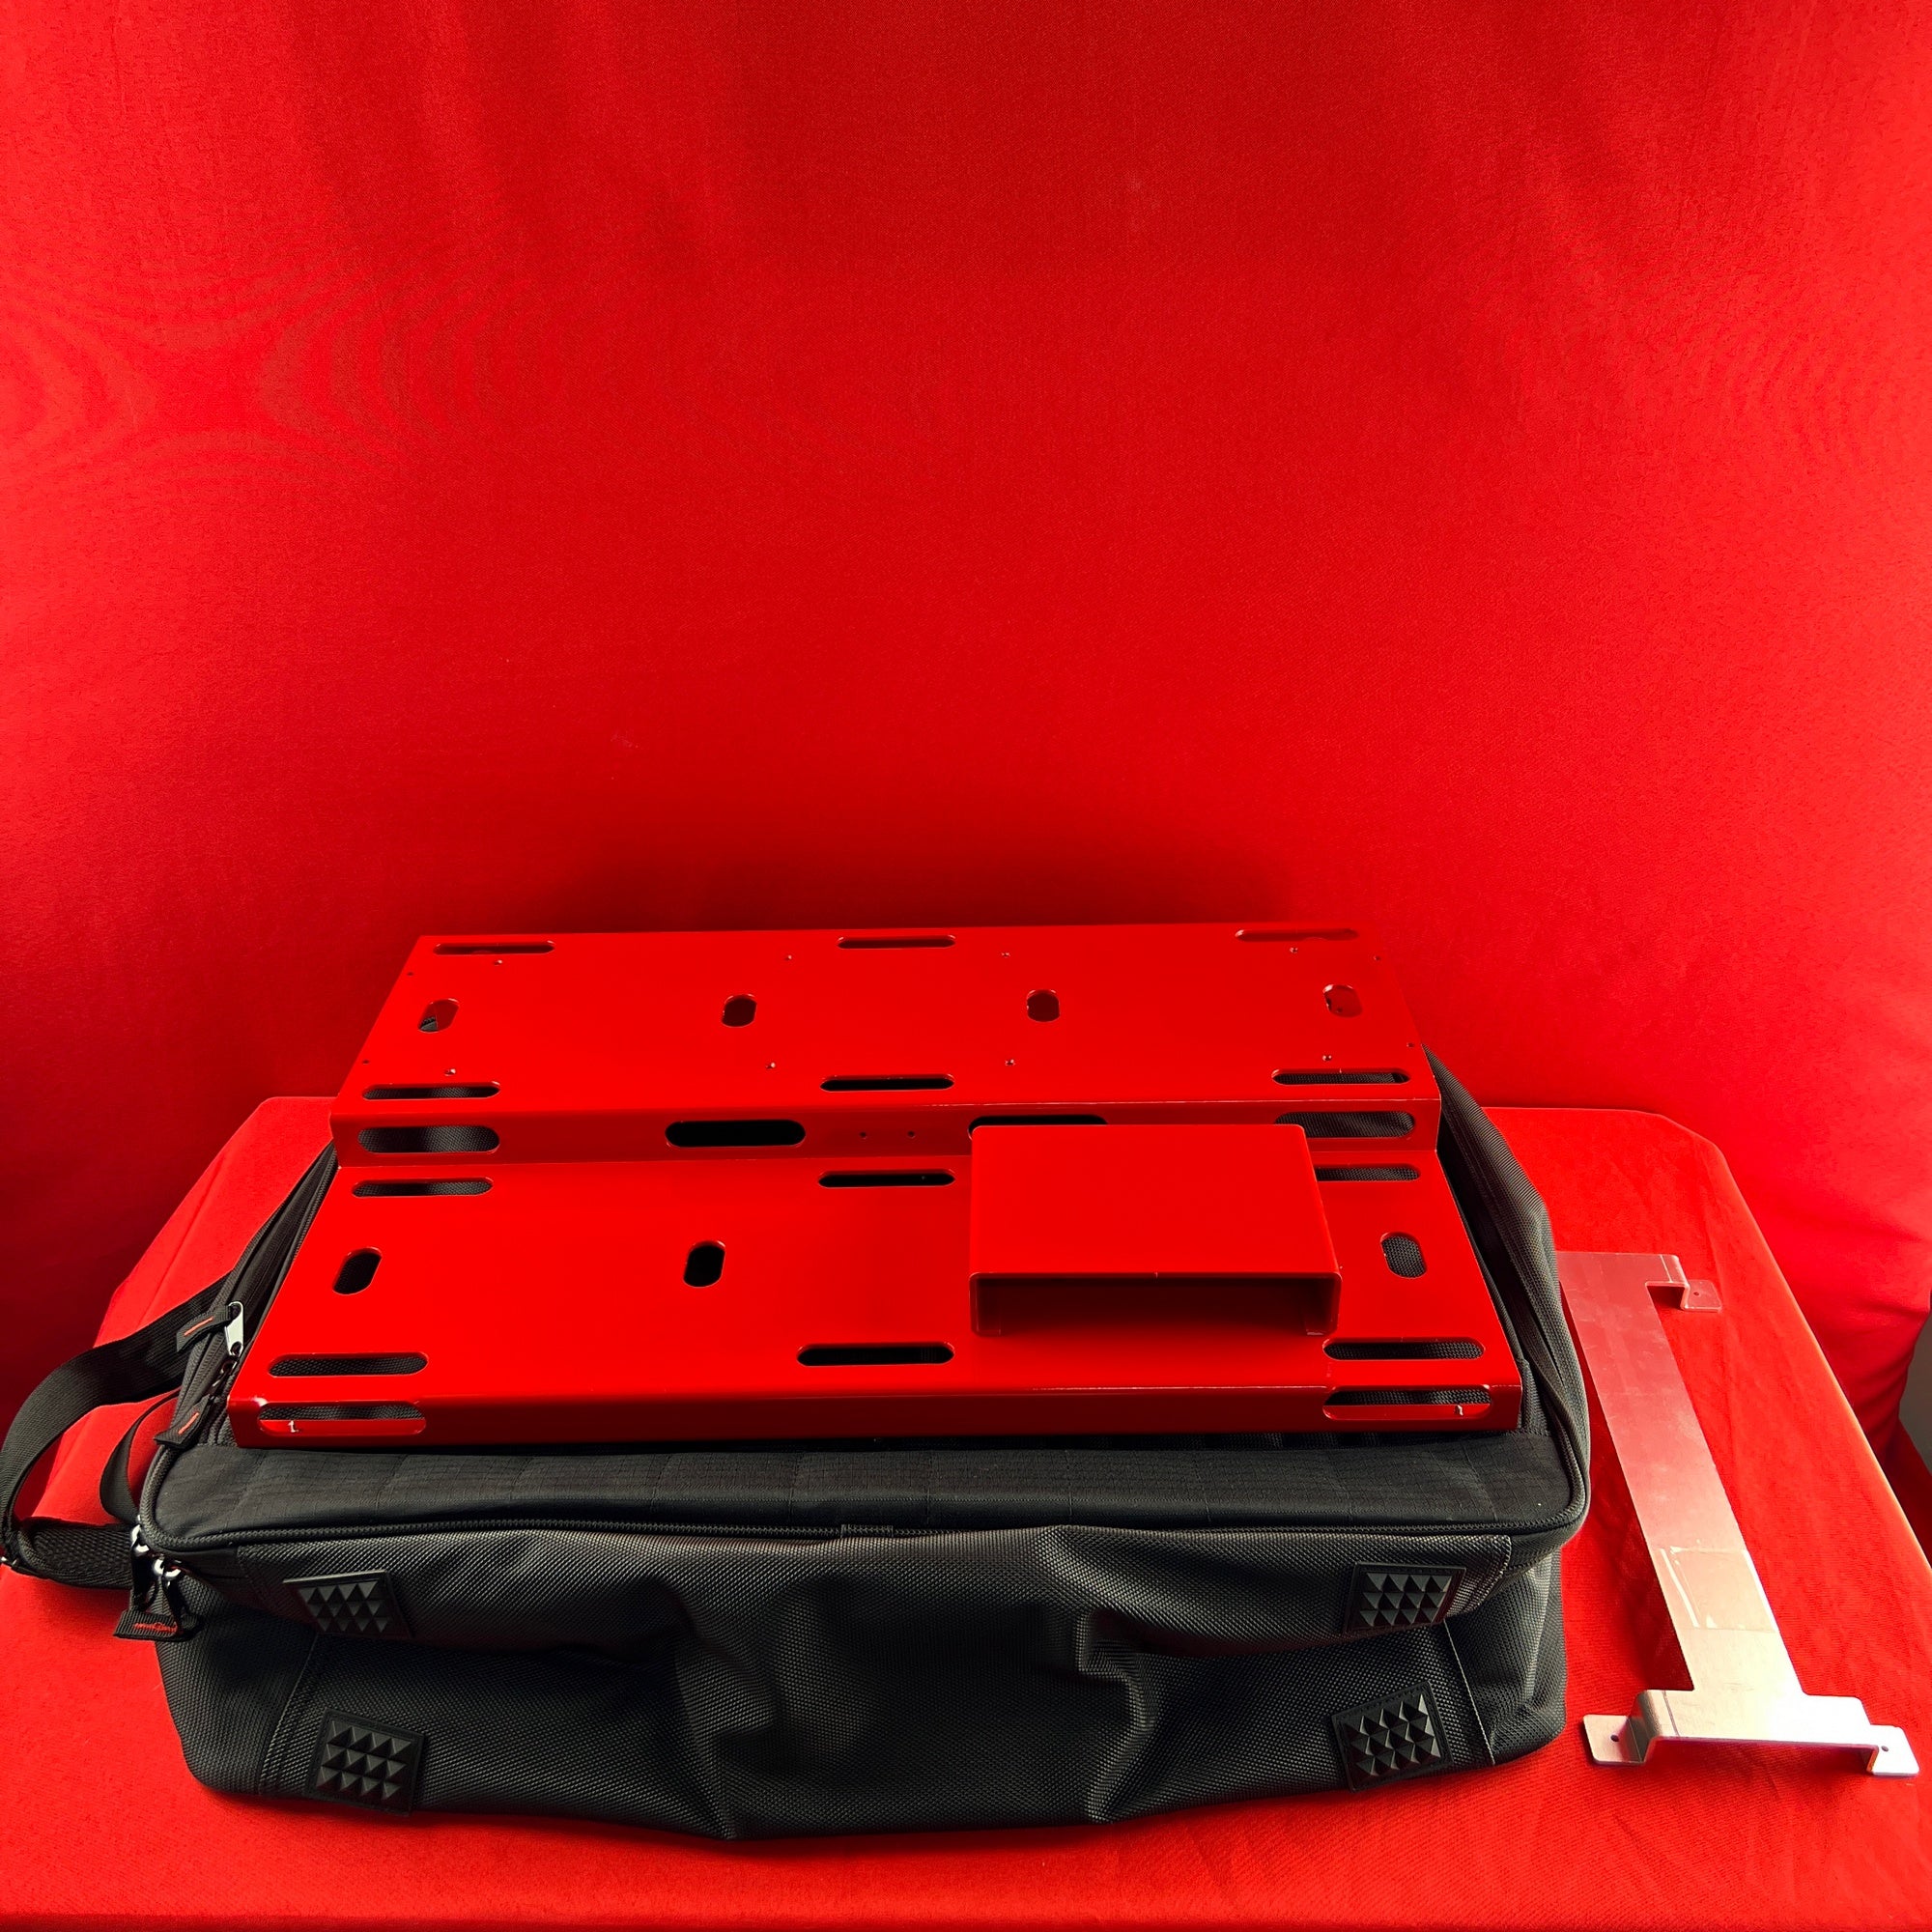 [USED] GO Pedalboards 24x16 Two-Tier Aluminum Pedalboard, Red w/Case and Riser